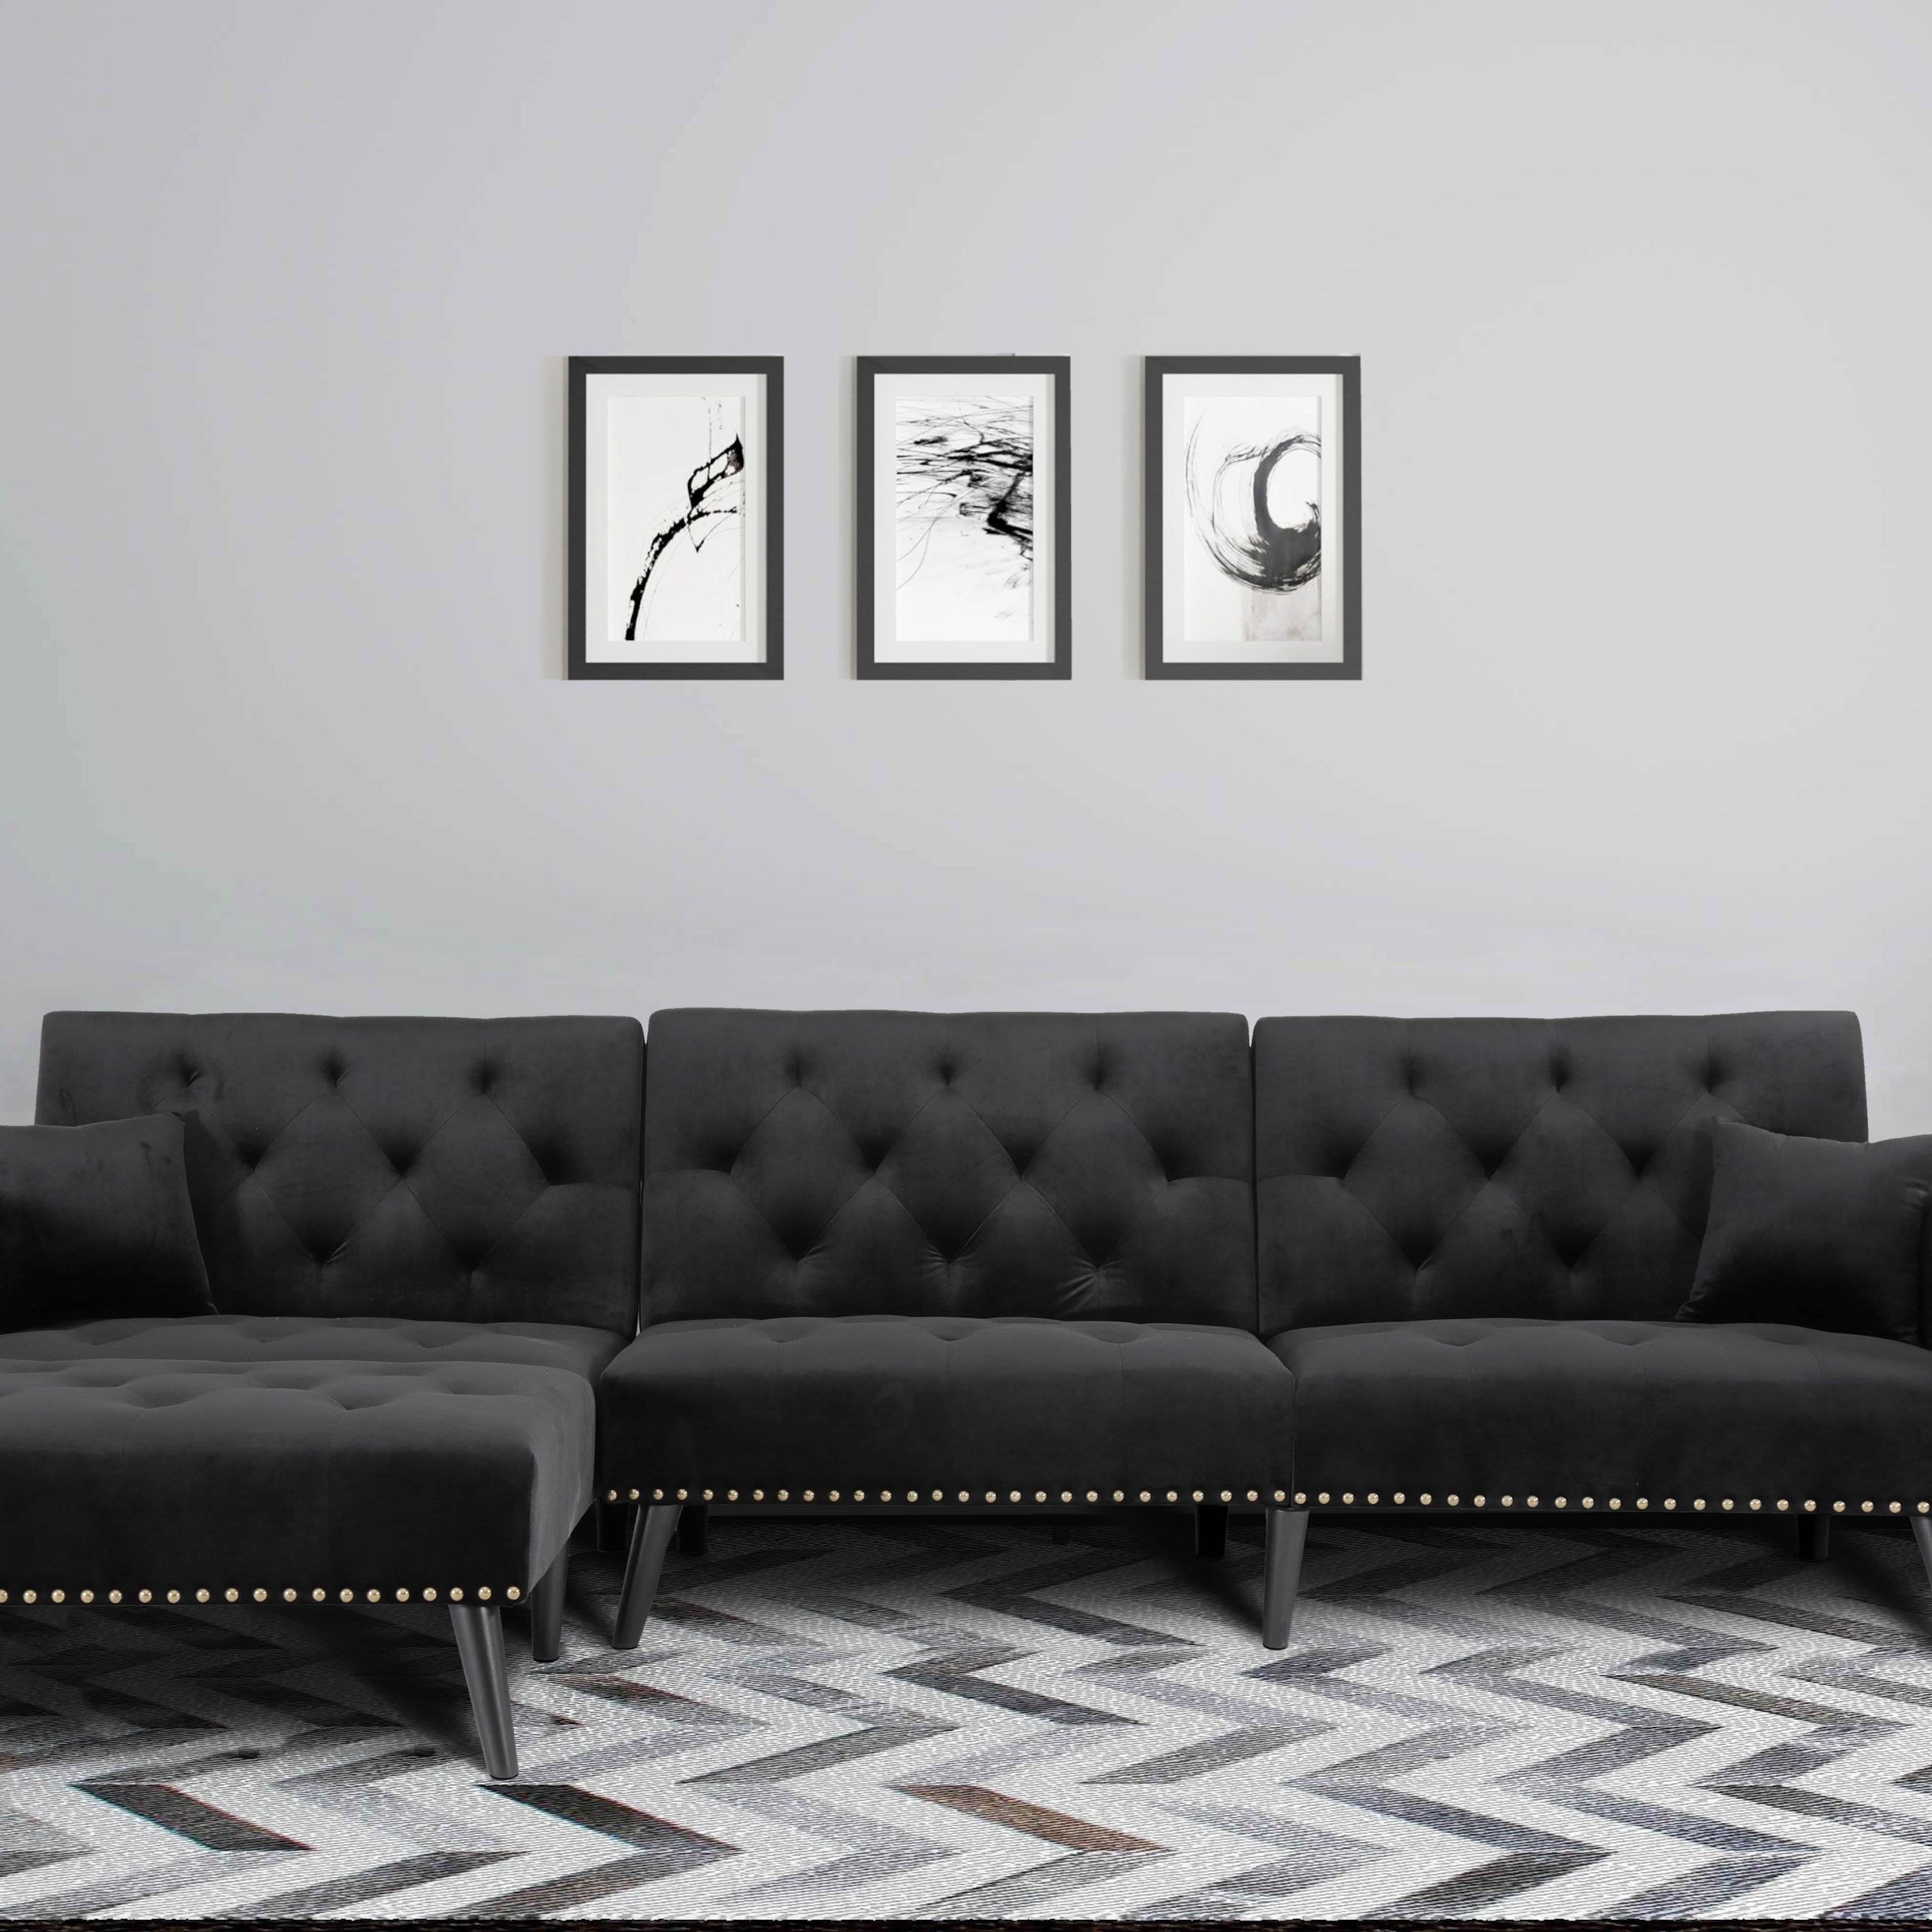 115'' Convertible Sectional Sofa,velvet Corner Sofa Bed Couch Sleeper,l Pertaining To 3 Seat L Shaped Sofas In Black (Gallery 10 of 20)